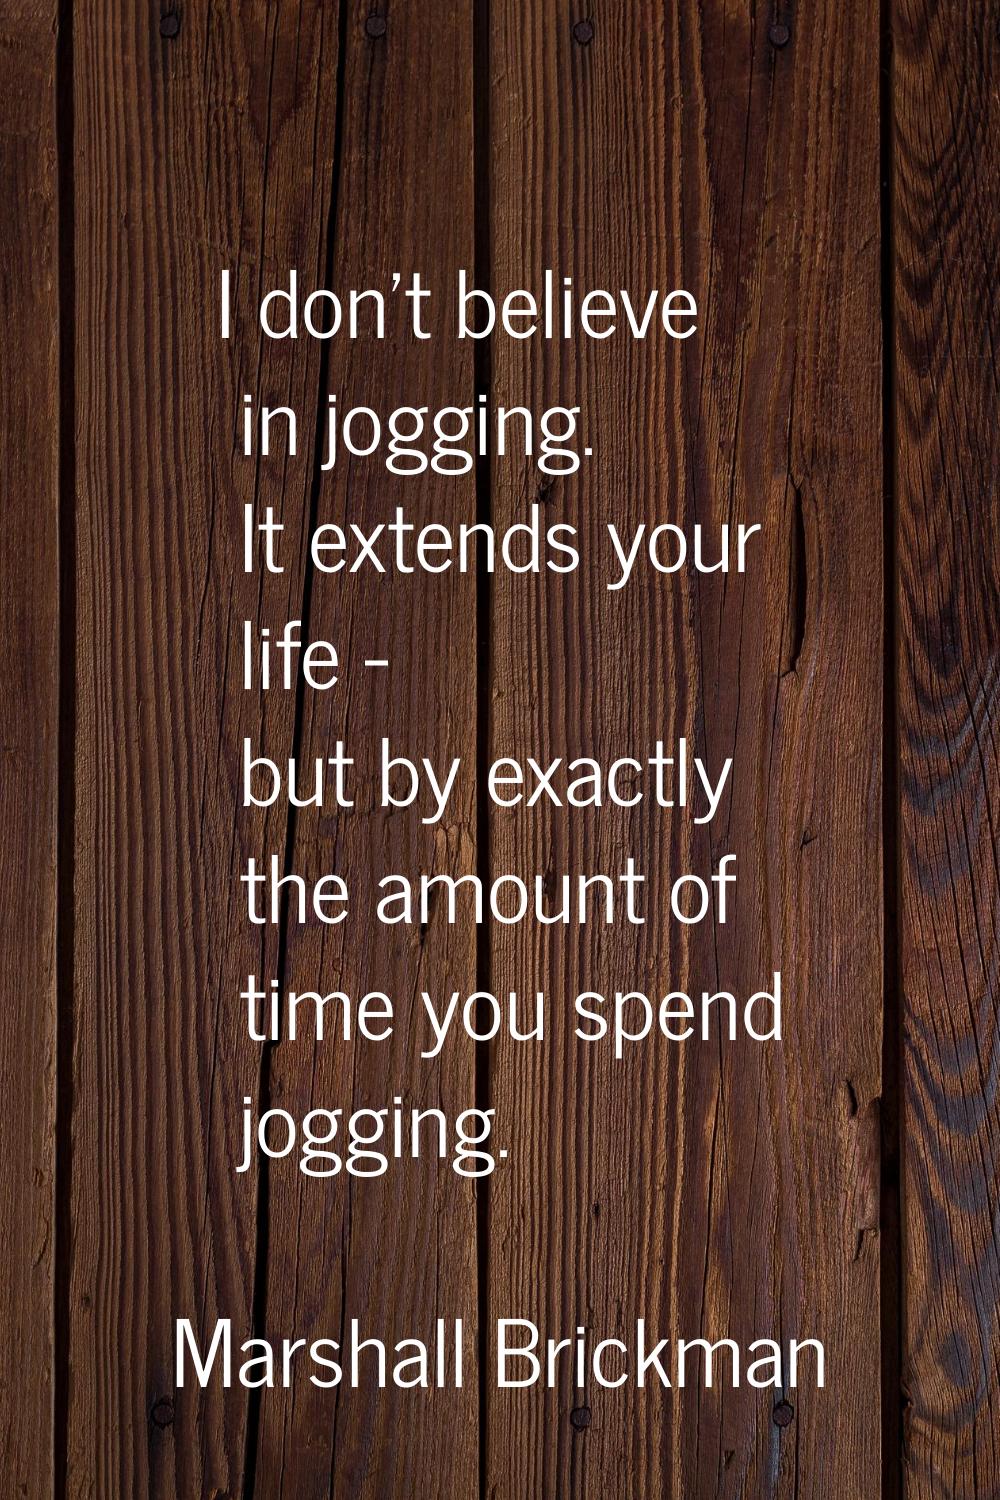 I don't believe in jogging. It extends your life - but by exactly the amount of time you spend jogg